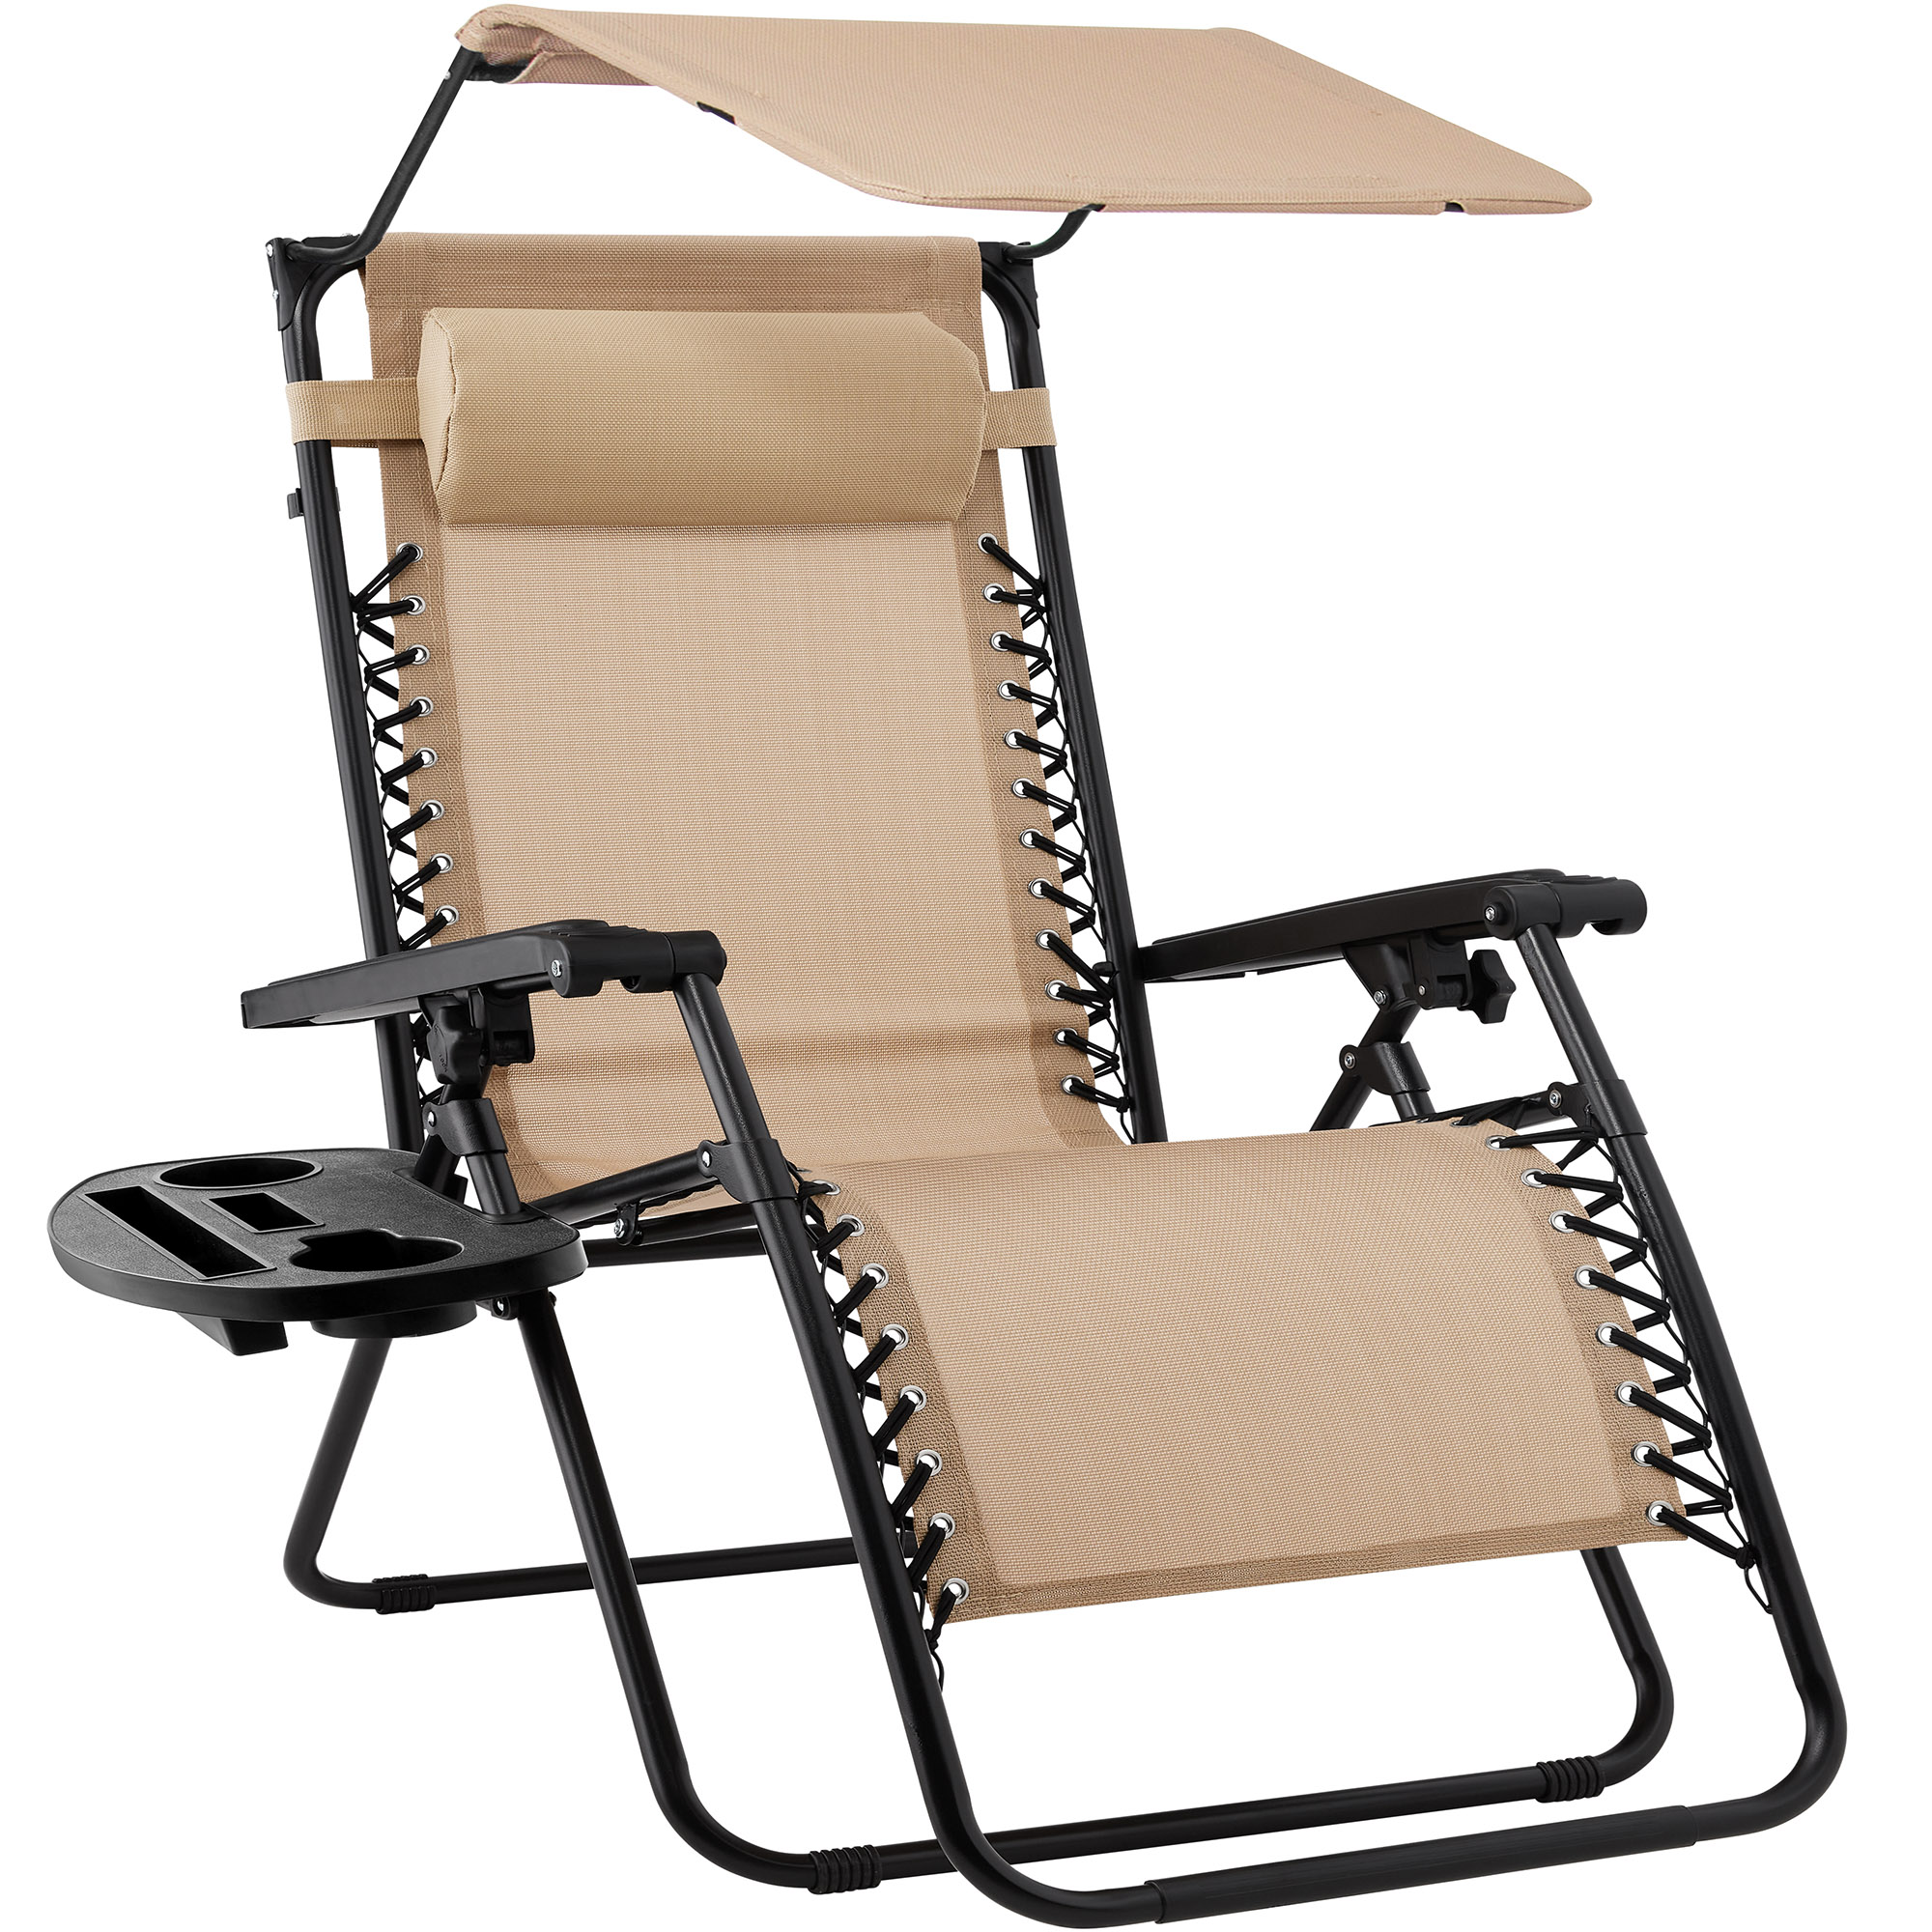 Best Choice Products Folding Zero Gravity Recliner Patio Lounge Chair w/ Canopy Shade, Headrest, Side Tray - Beige - image 1 of 8